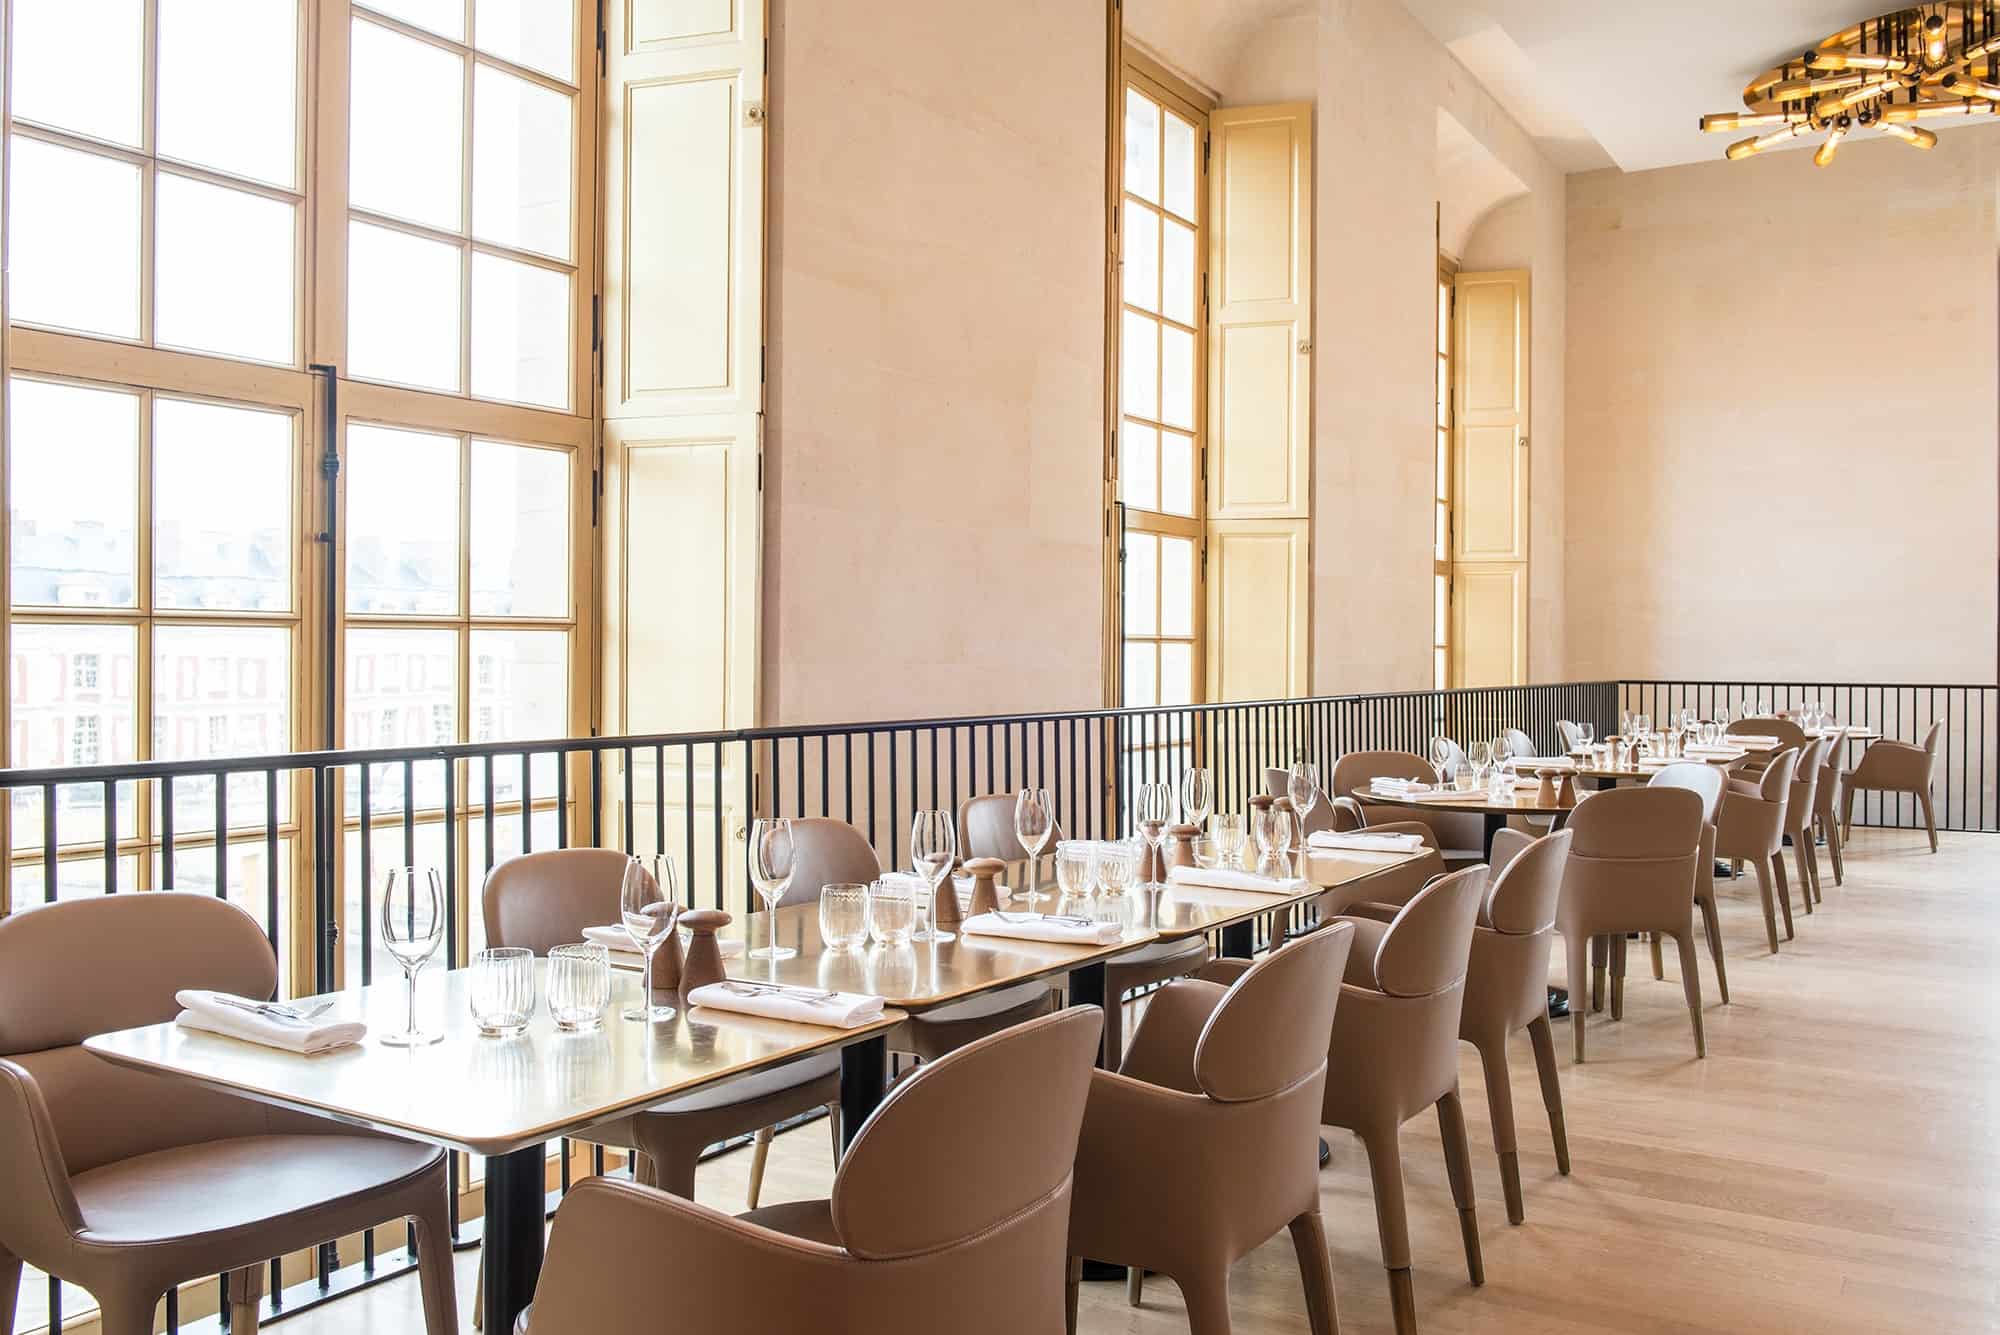 Ore by Alain Ducasse at the Palace of Versailles